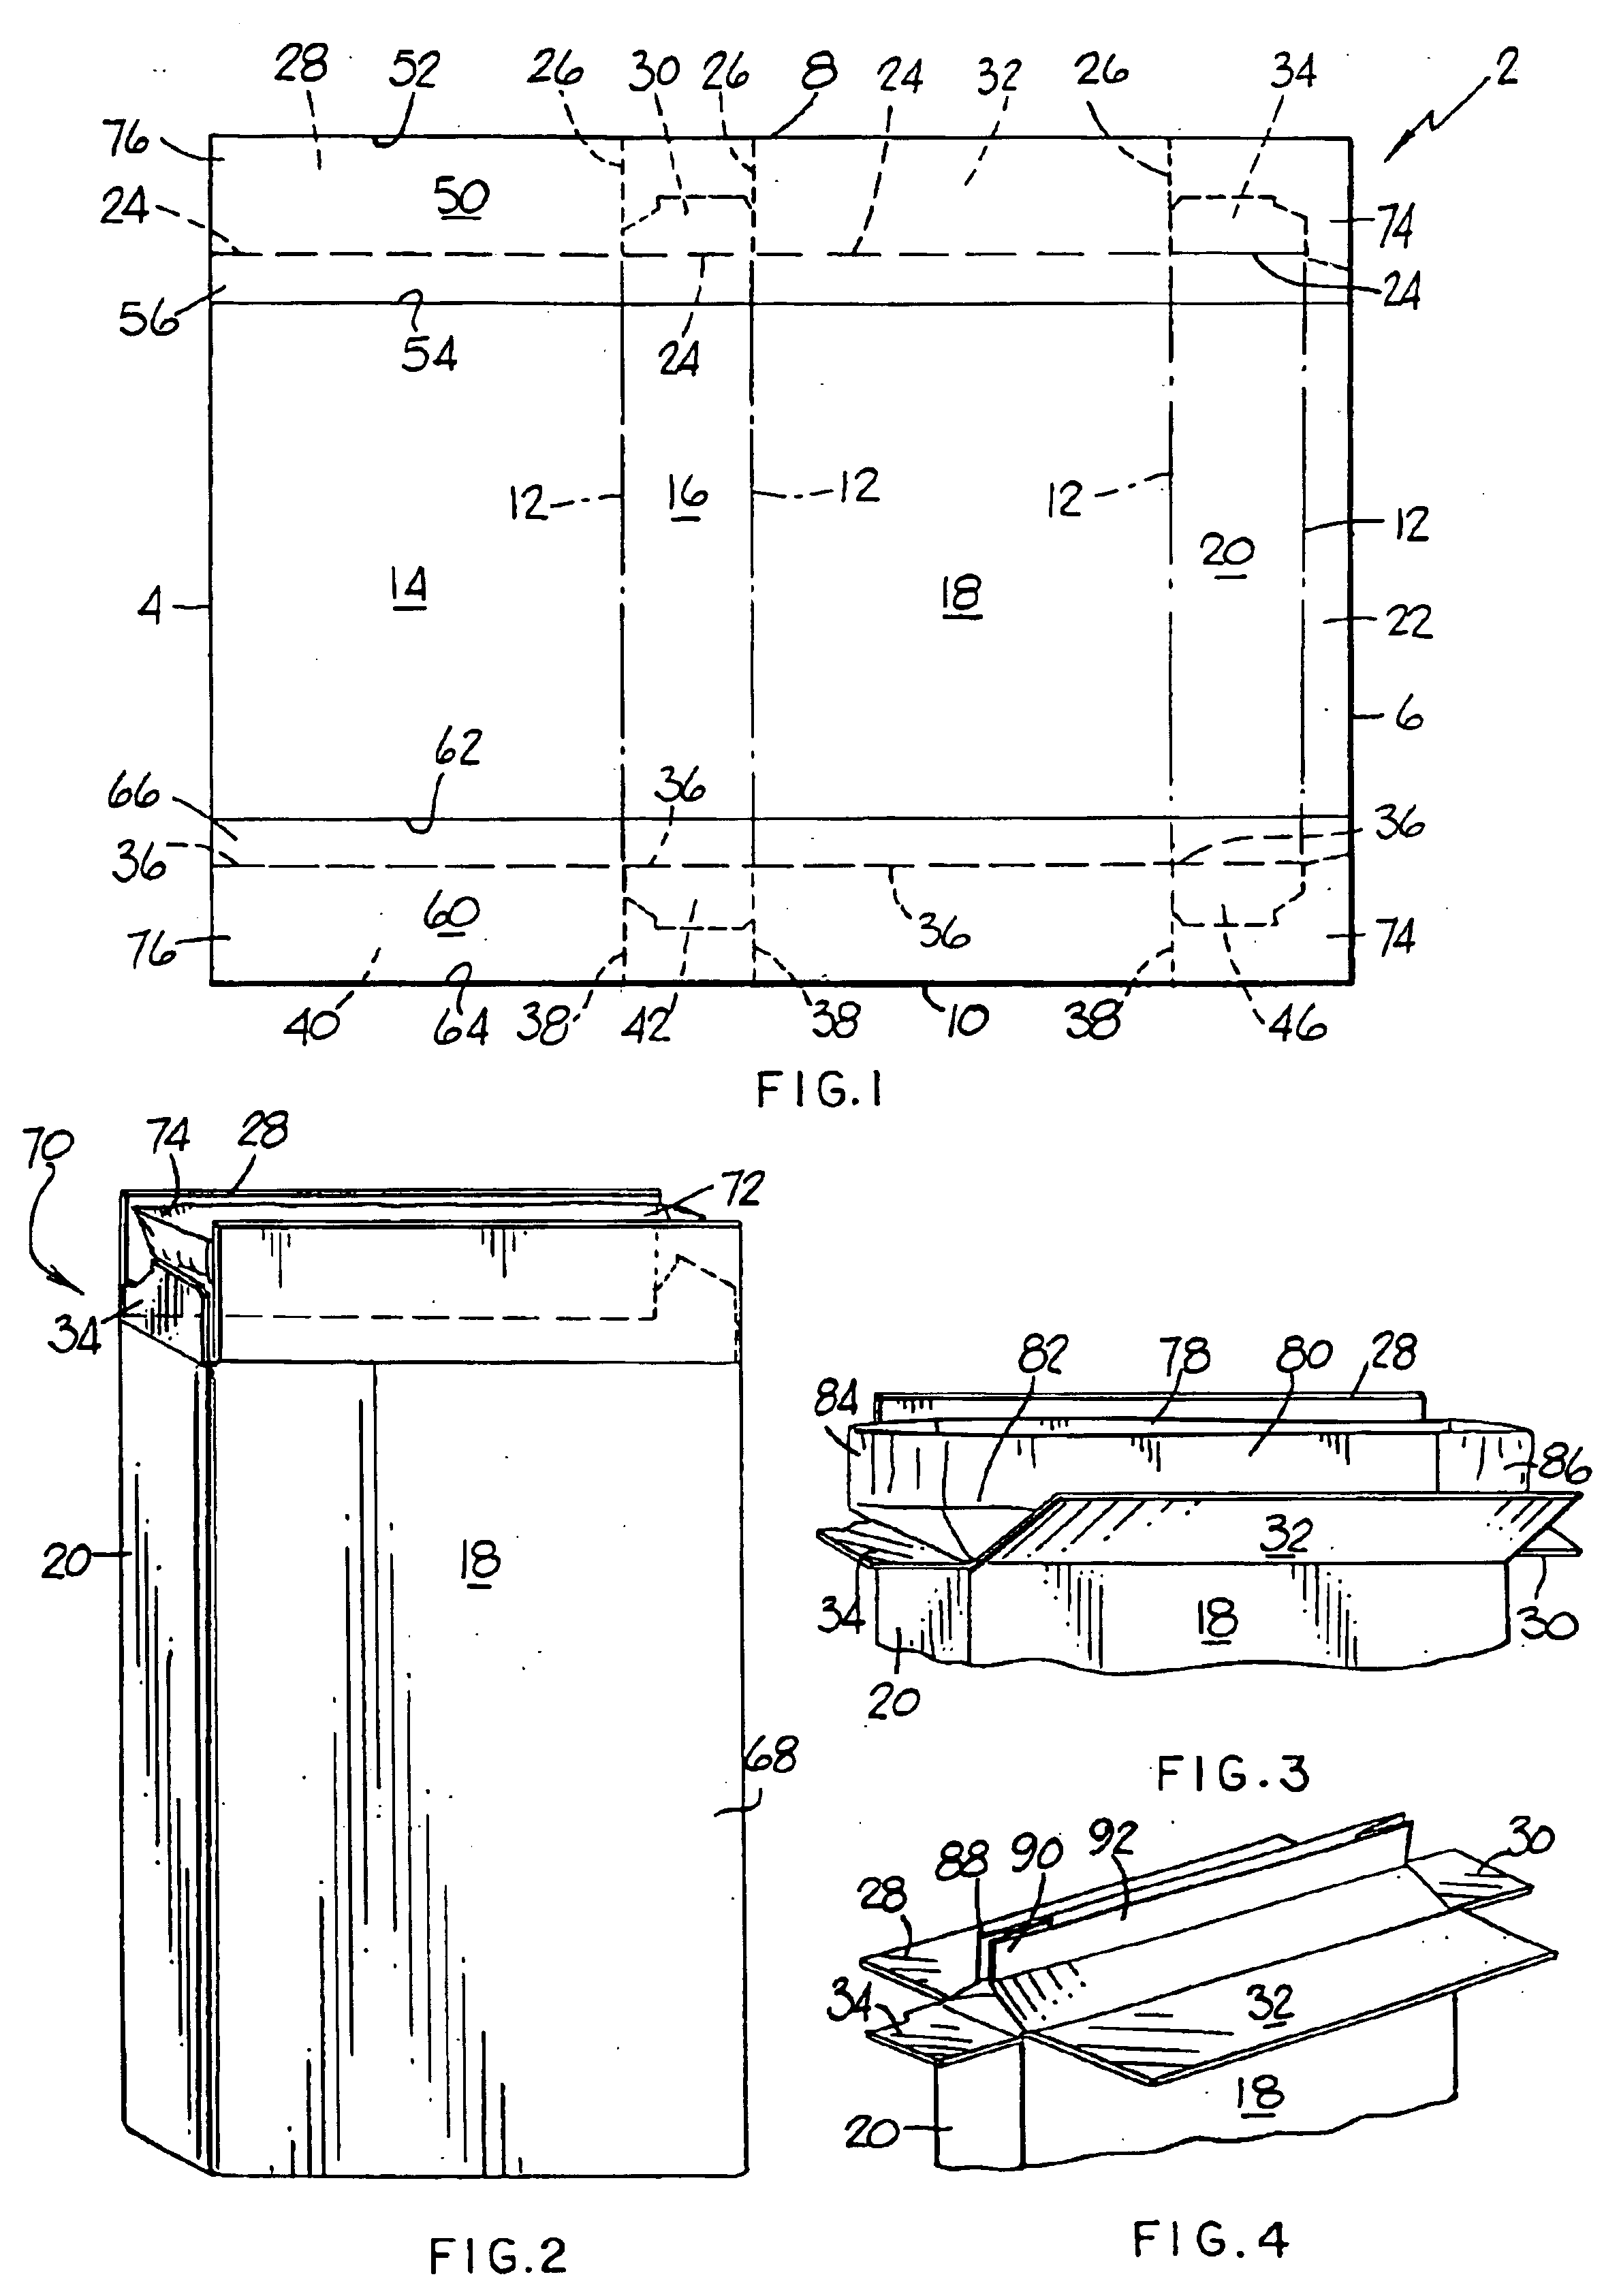 Carton blank and method of forming a carton blank